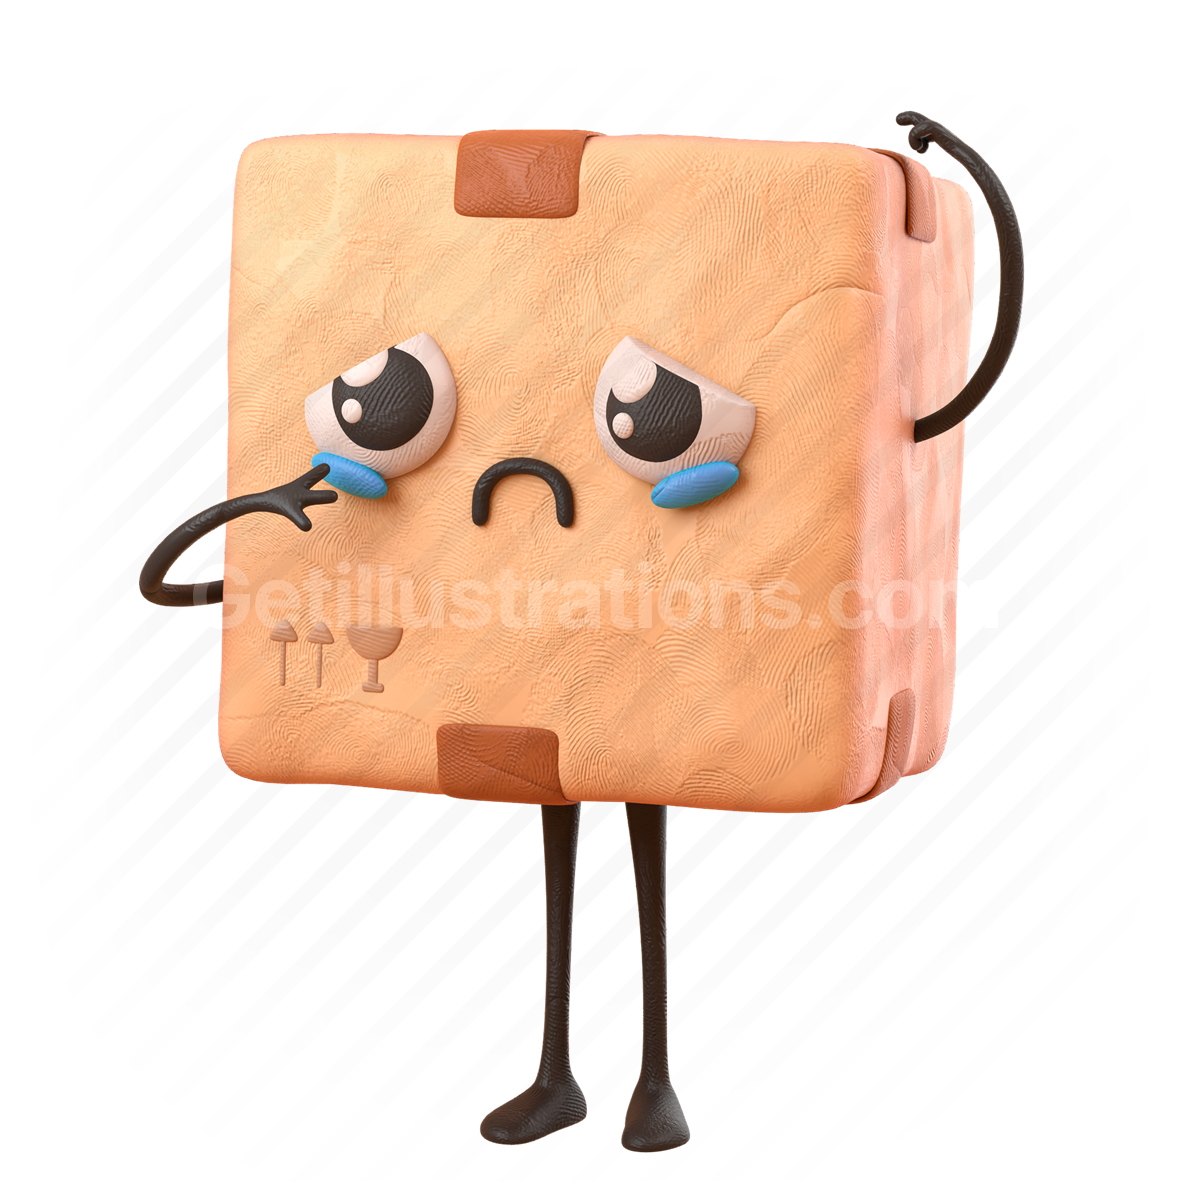 box, package, delivery, logistics, character, sad, unhappy, crying, cry, emotion, emoticon, emoji